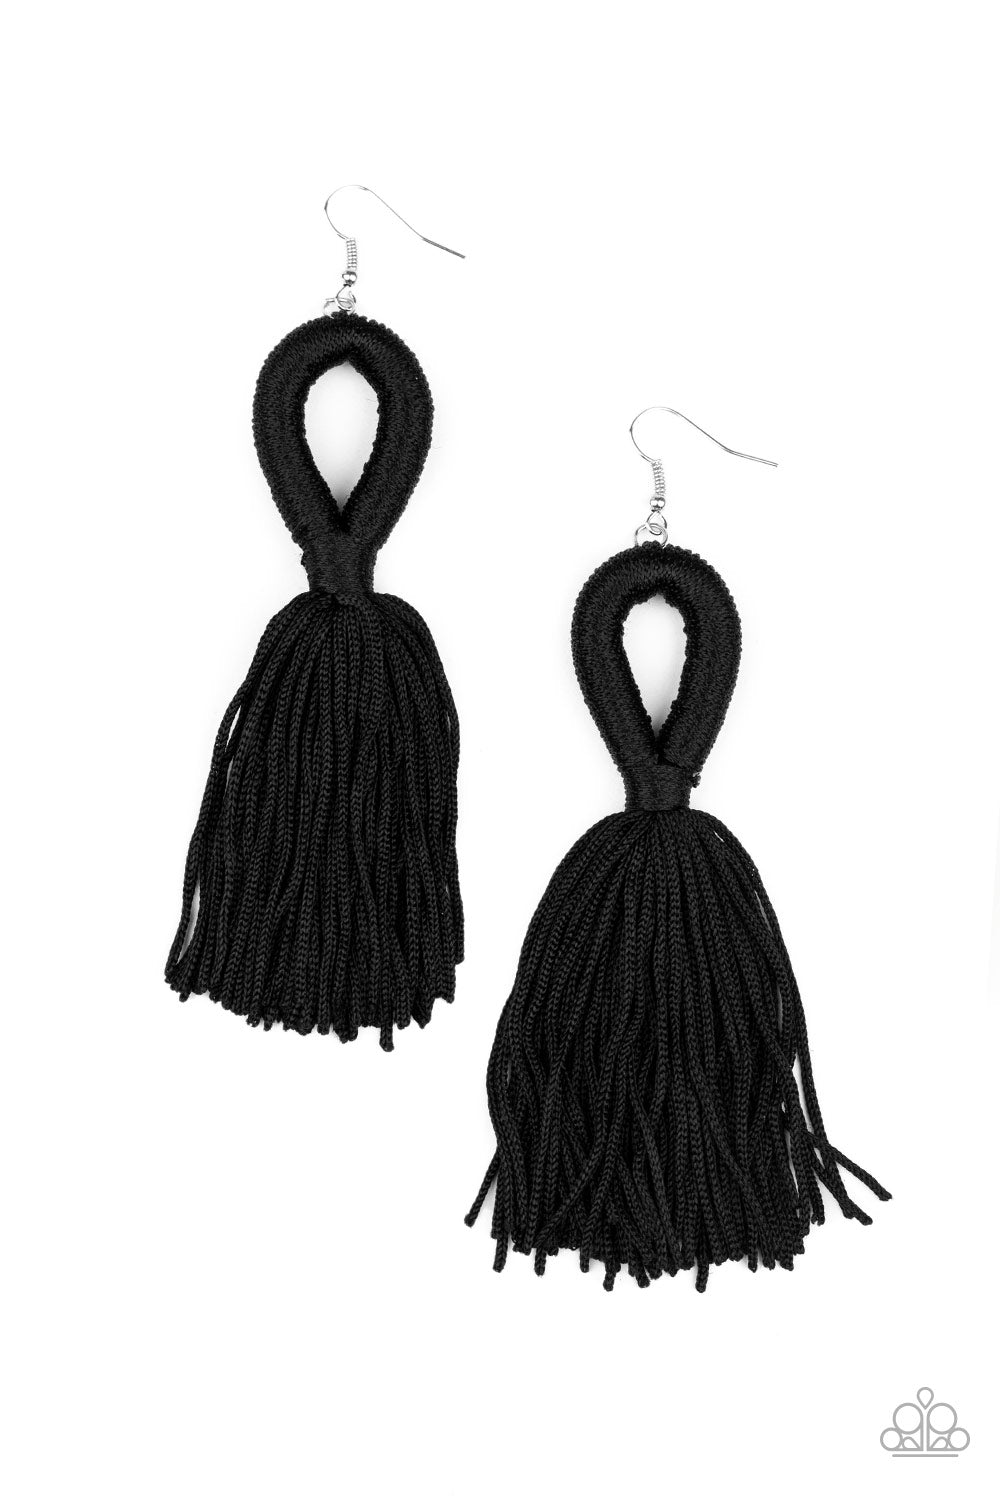 Tassels and Tiaras - Black - Gtdazzlequeen